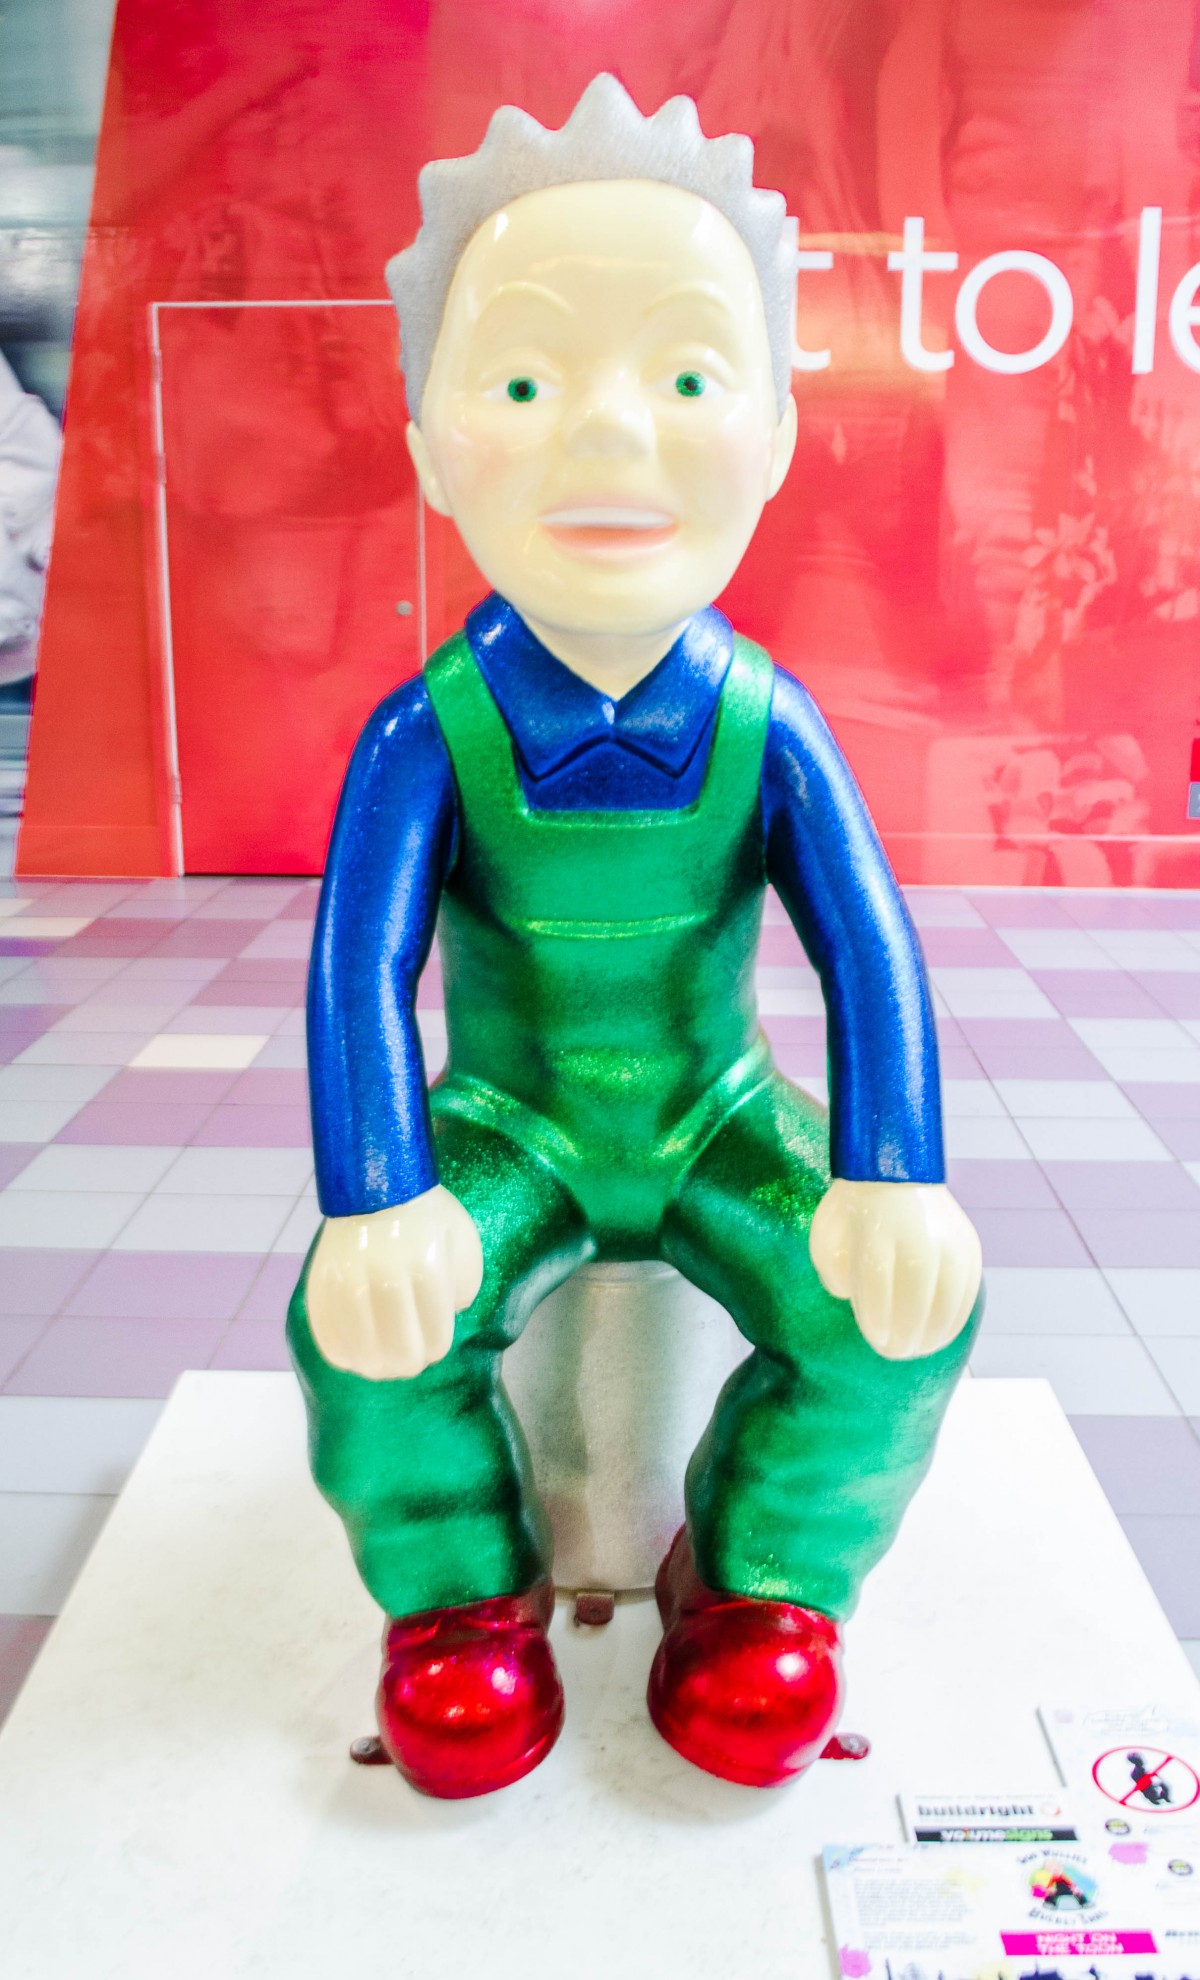 Camp Glitzy Oor Wullie with green dungees on by John Carr. Usually Oor Wullie is rather scruffy, and John wanted to see what hed look like blitzed up a bit!